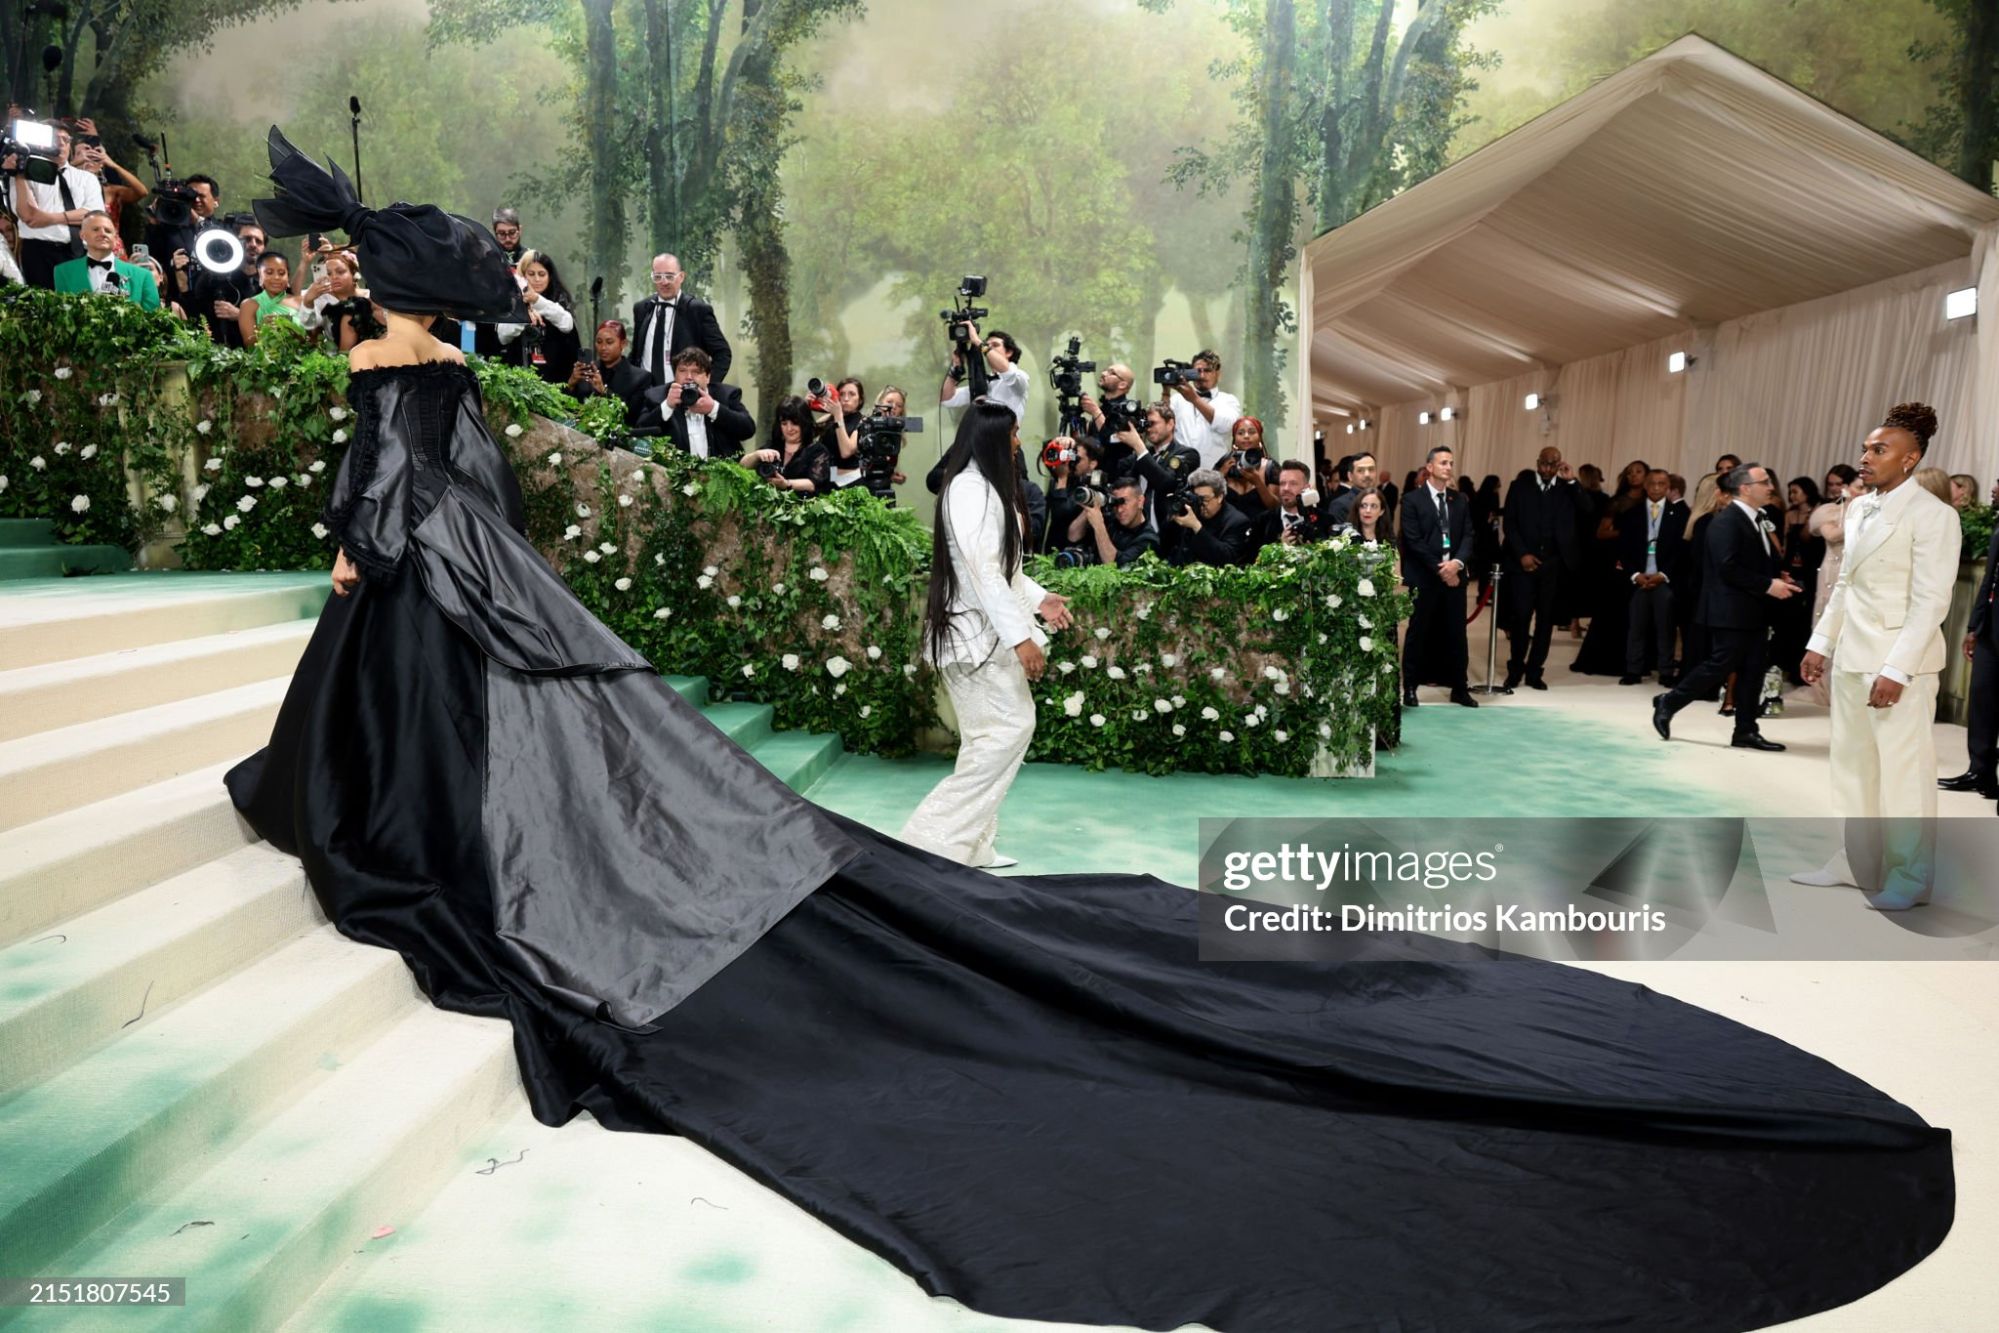 gettyimages-2151807545-2048x2048.jpg